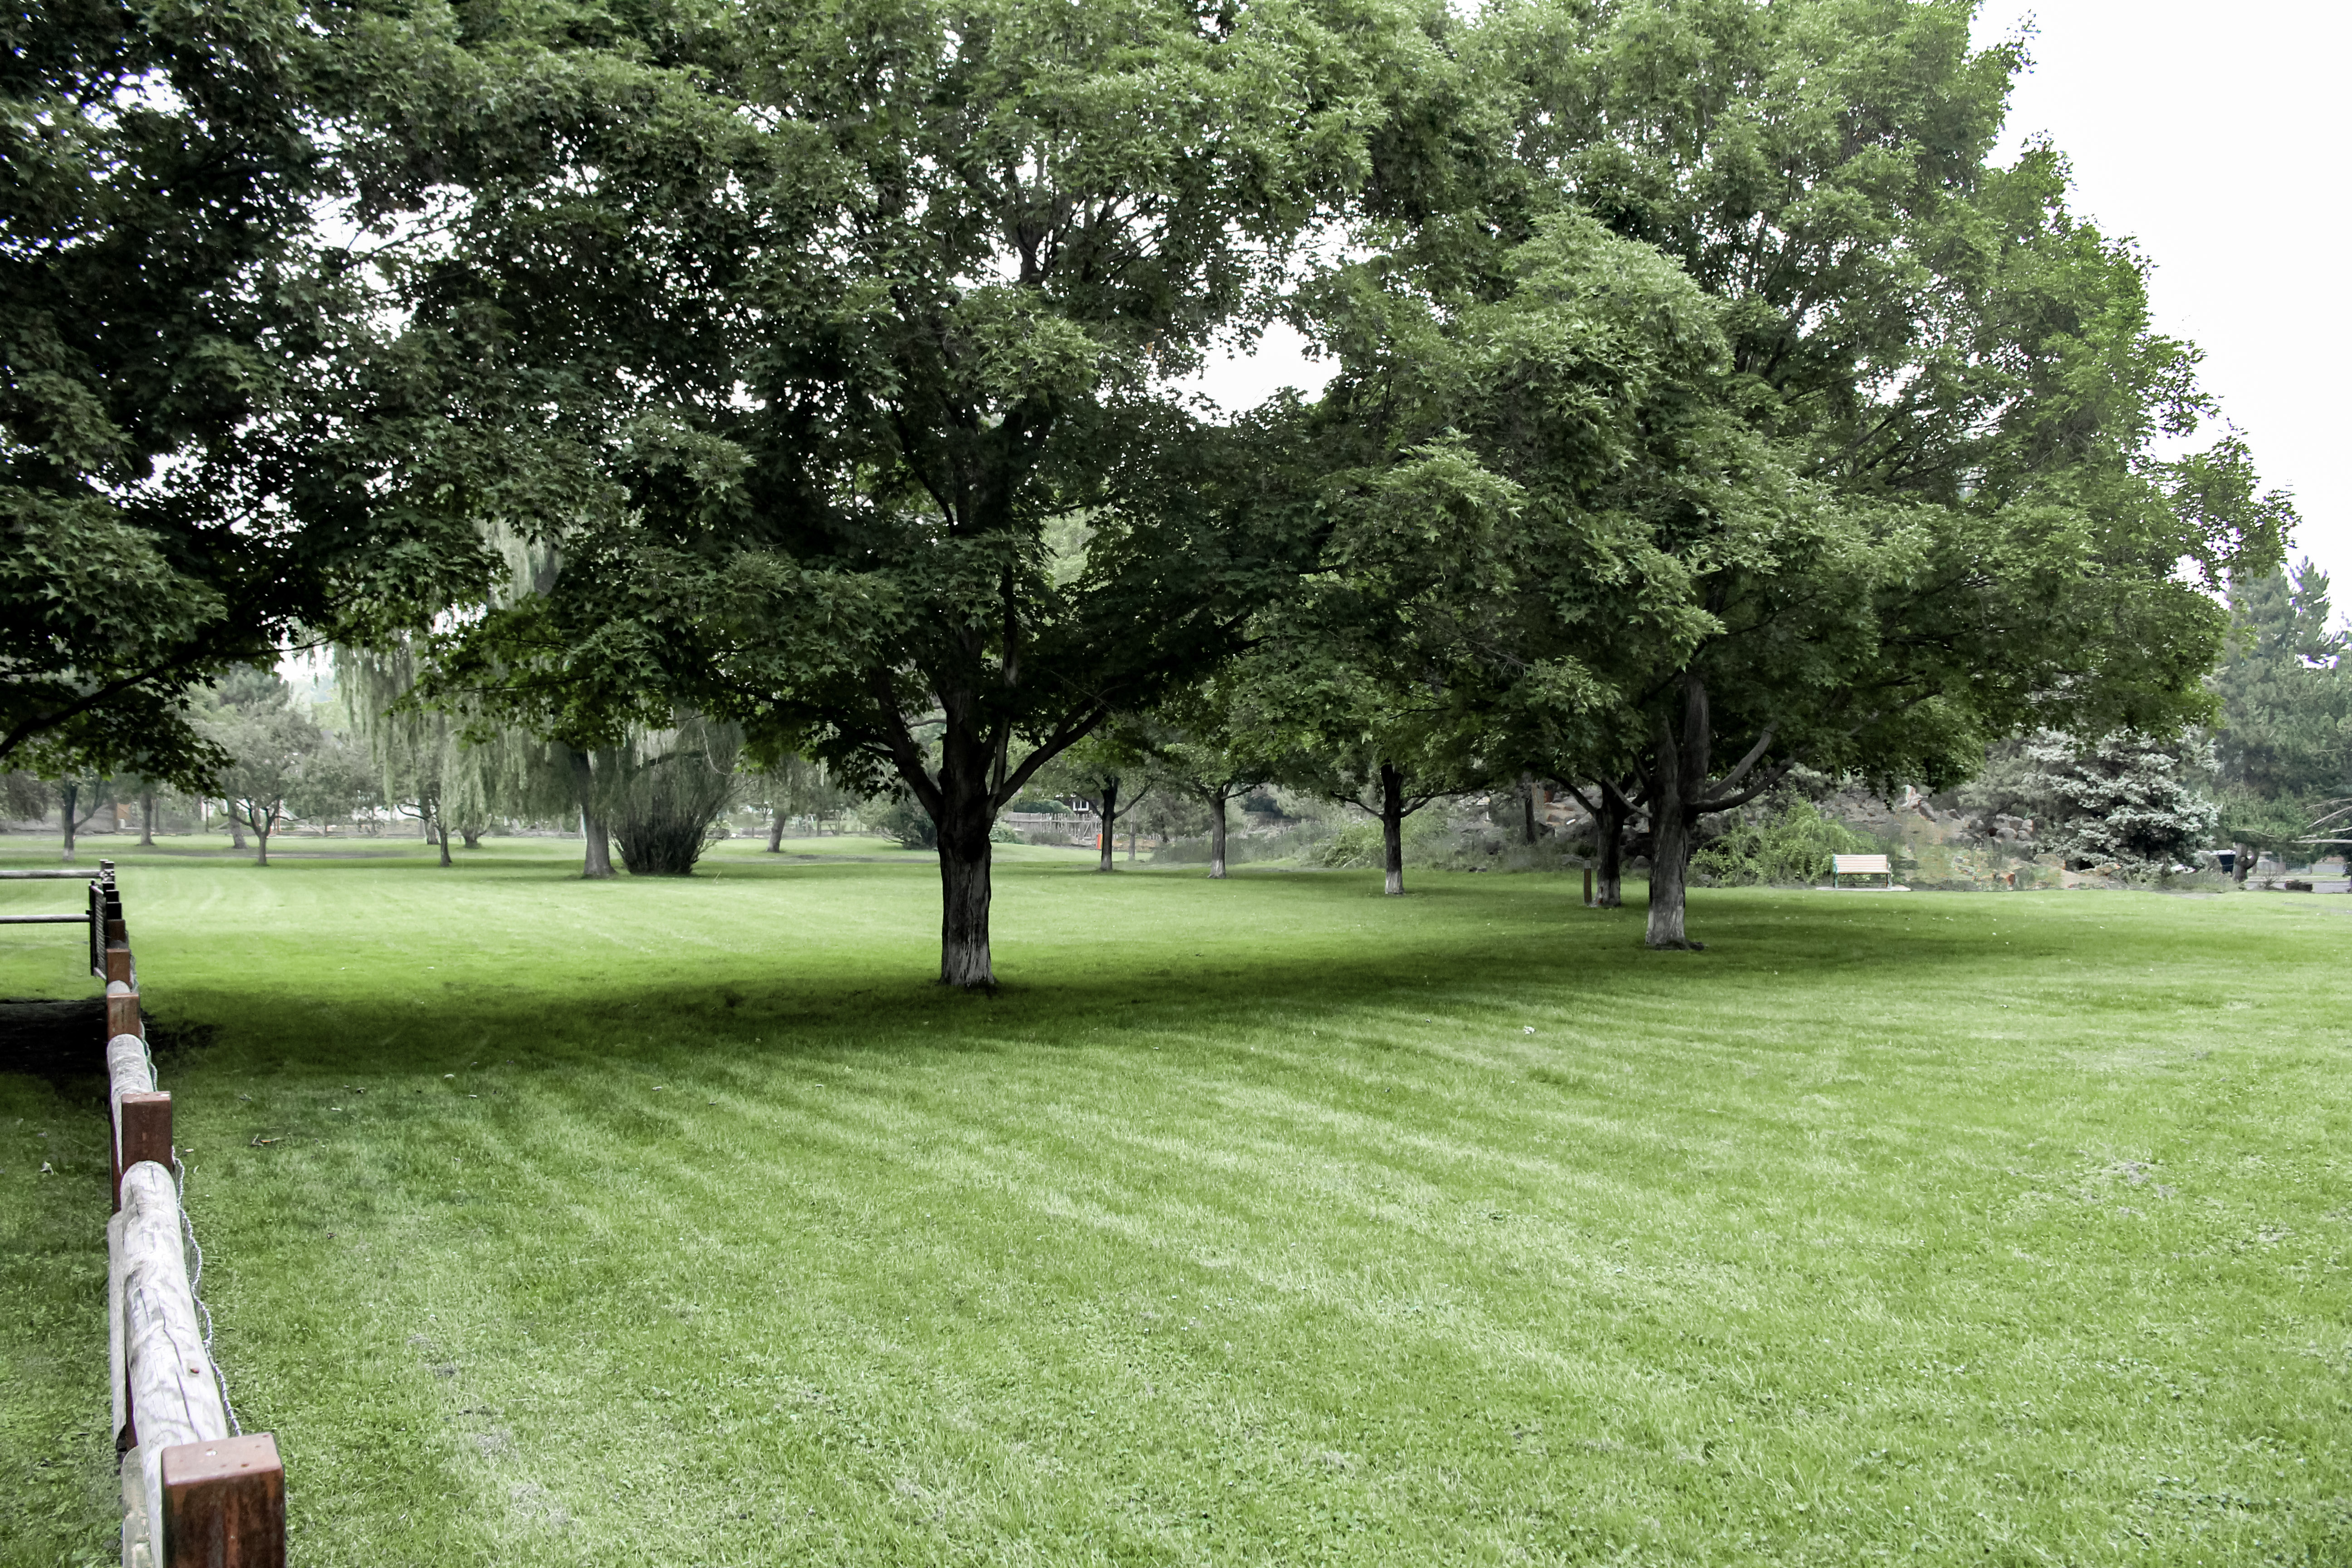 open lawn under mature trees at hollinshead park